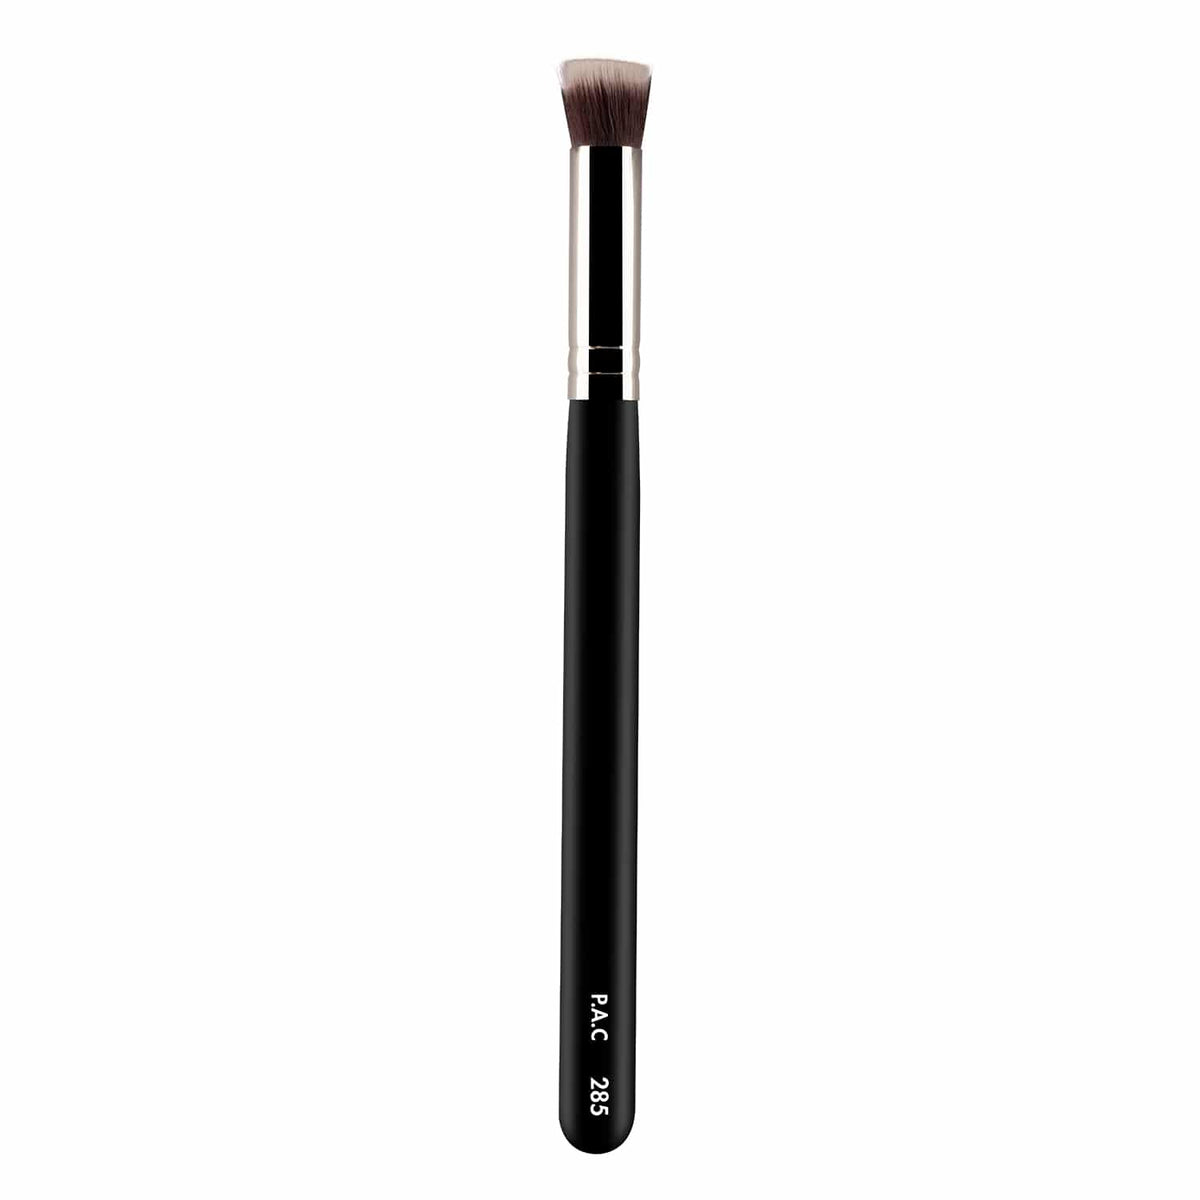 PAC Concealer Brush 285 PAC